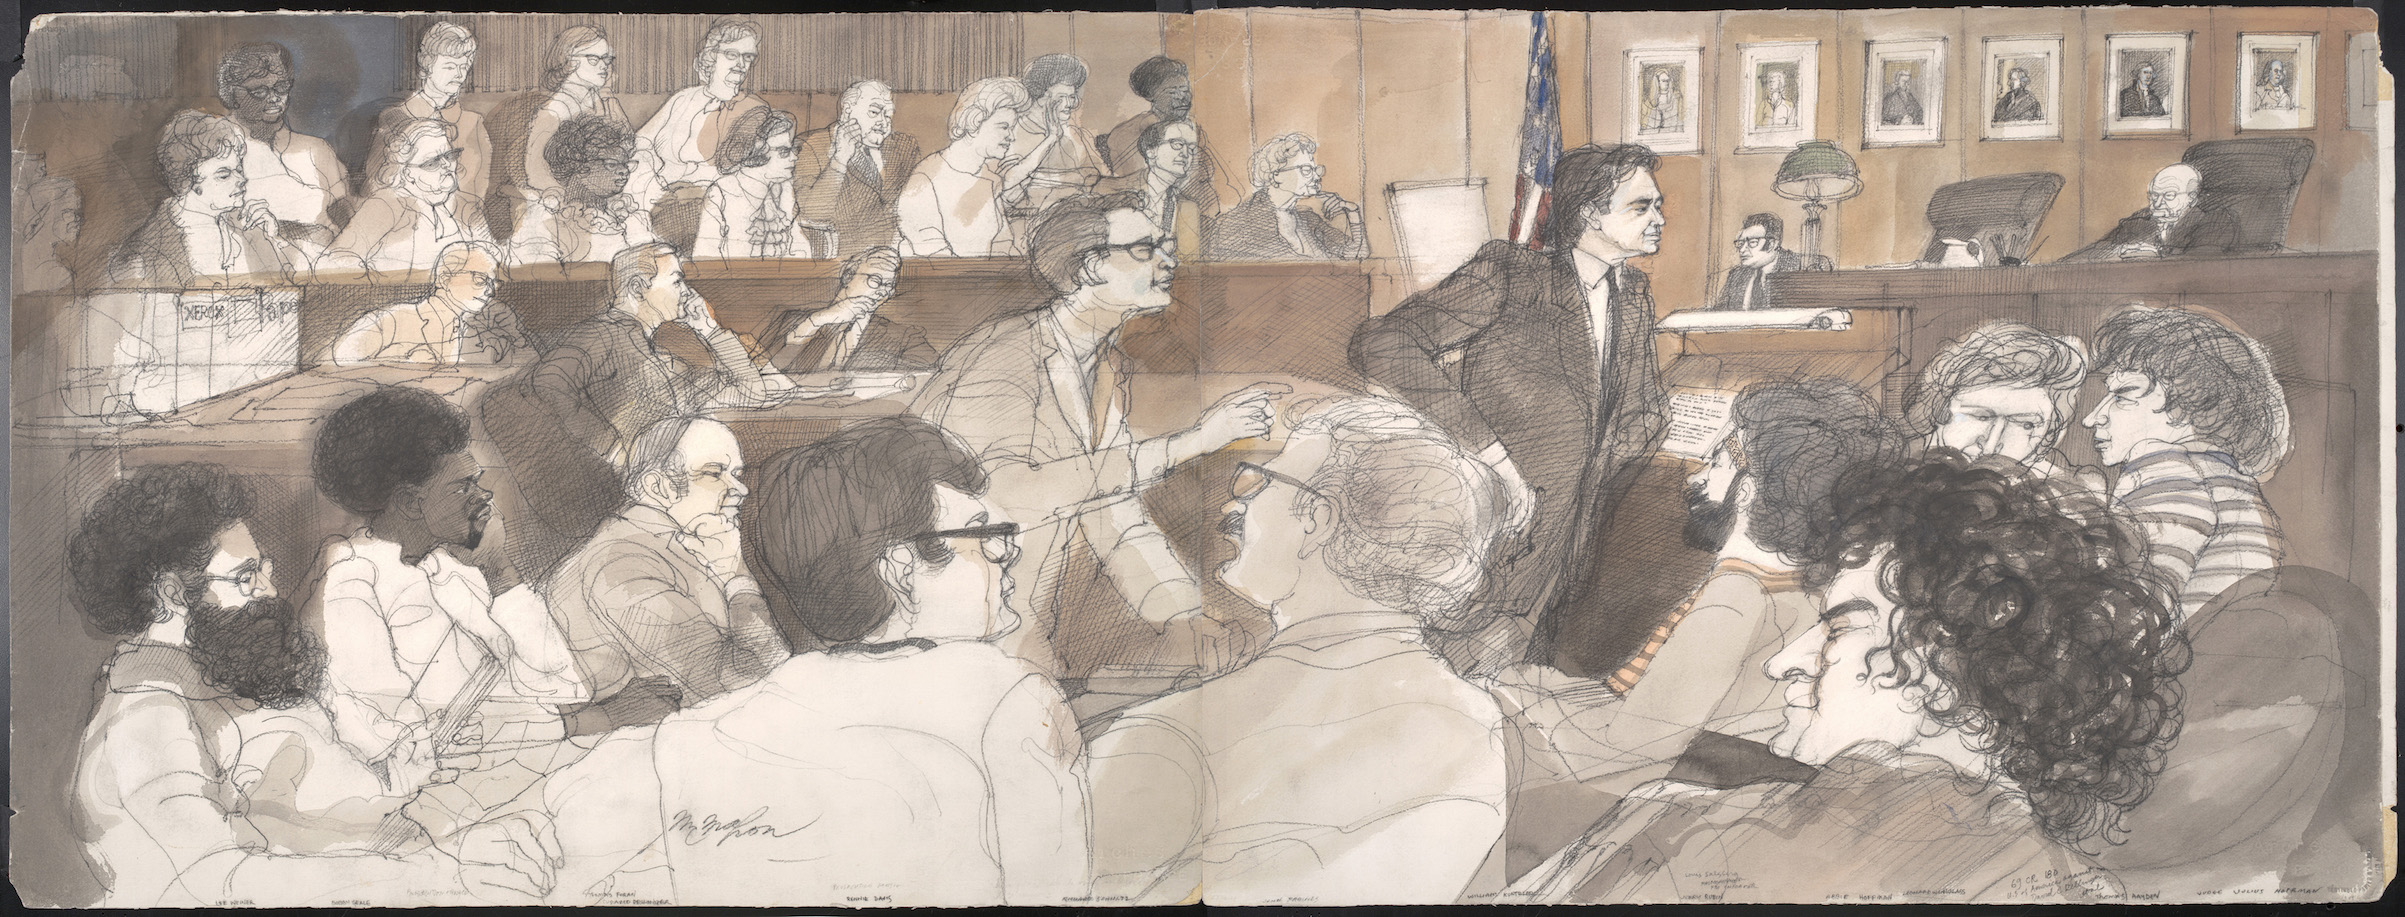 Panoramic view of courtroom with the defendants, prosecutors, jury, and judge, in a courtroom illustration (by Franklin McMahon) during the trial of the Chicago Eight, Chicago, Illinois, late 1969 or early 1970. (Chicago History Museum/Getty Images)